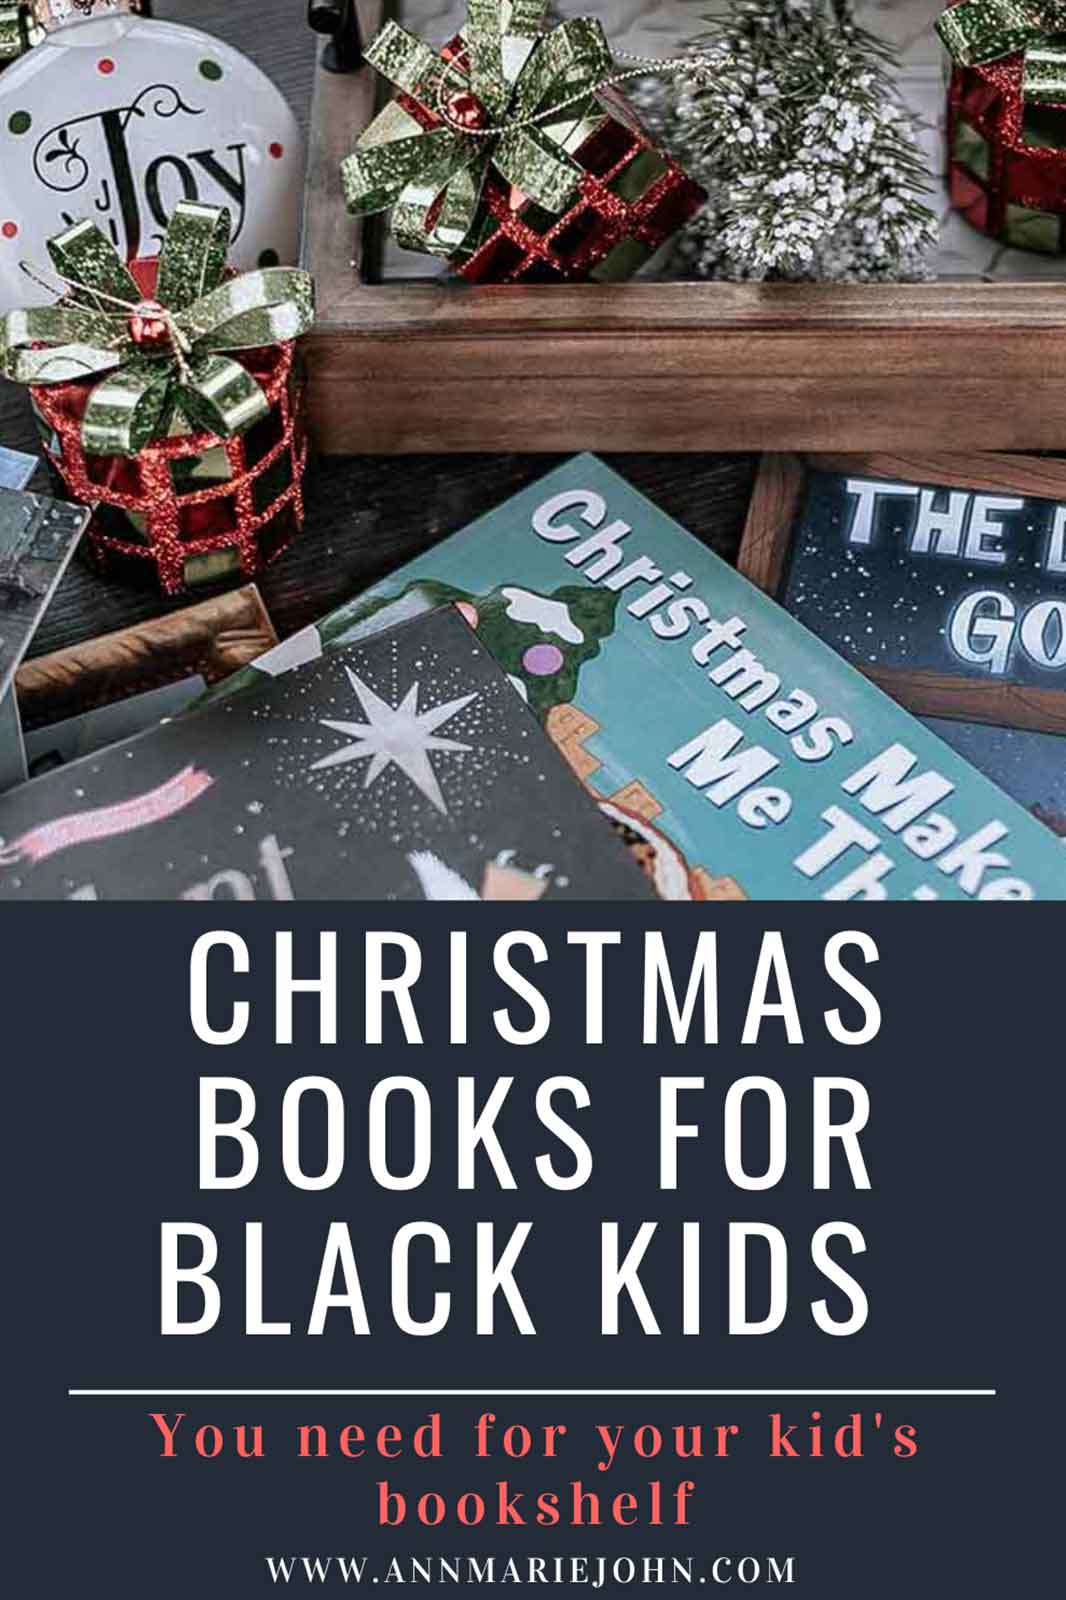 Christmas in July: Celebrating a Black Christmas & Kwanzaa With Books for Kids